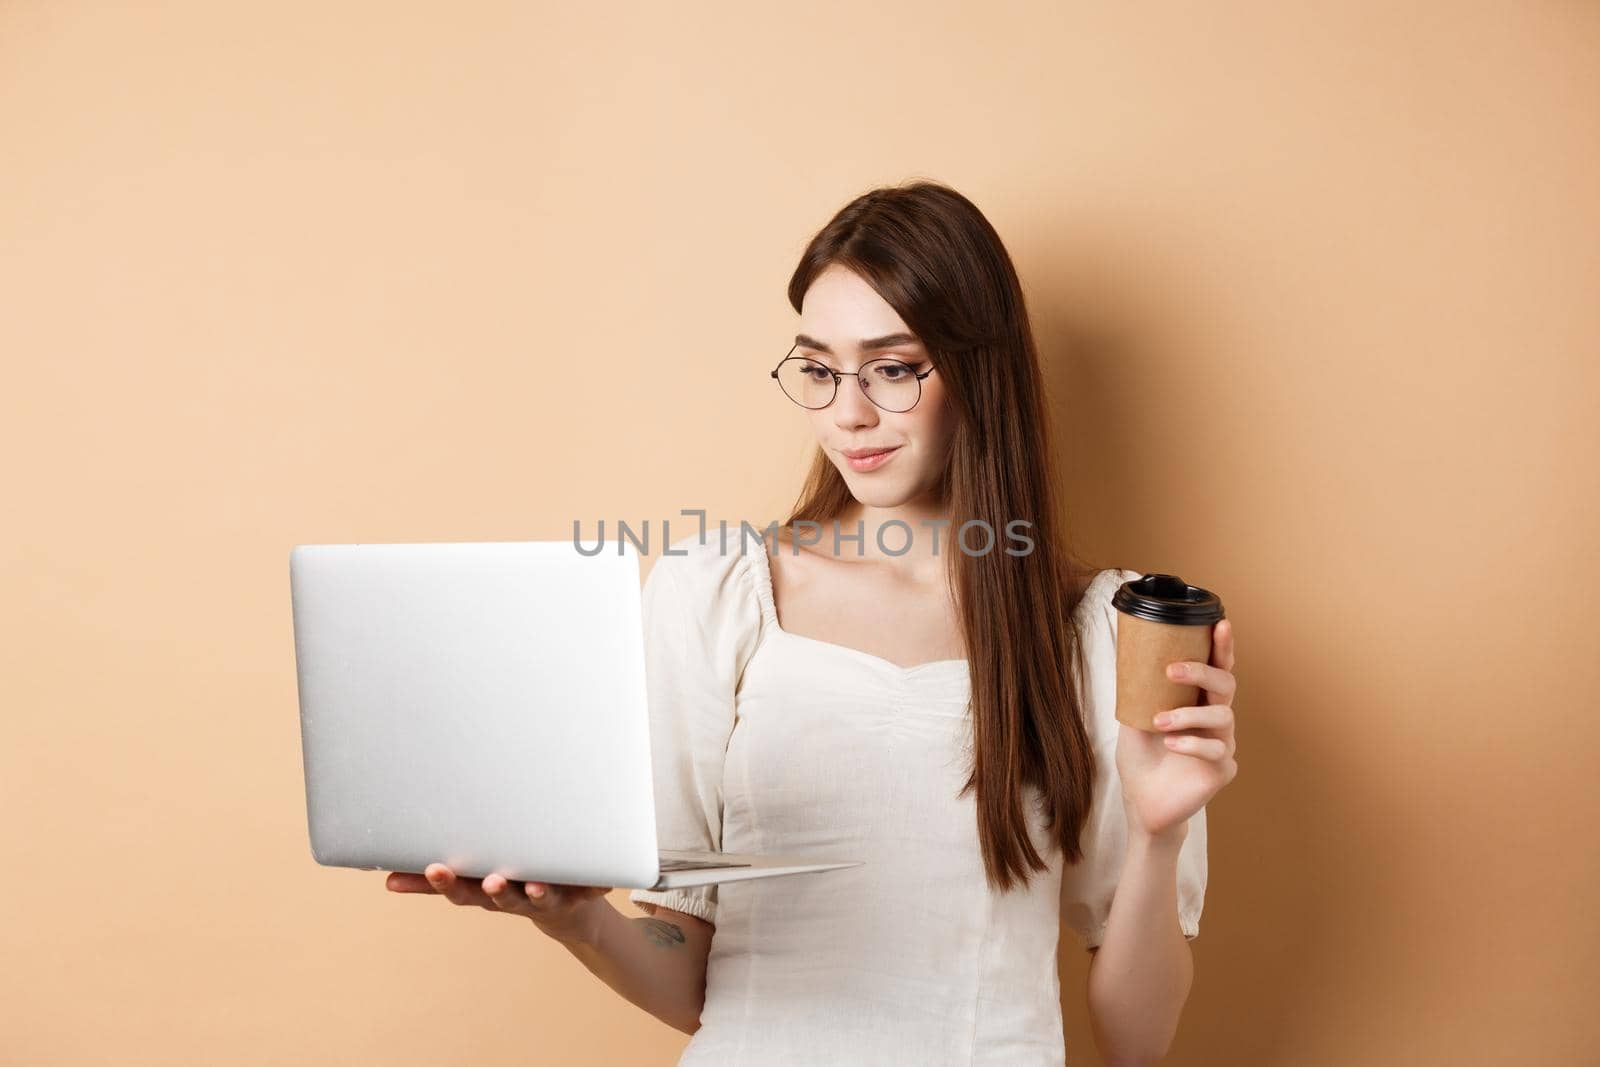 Portrait of woman working on laptop and drinking coffee. Girl student using computer for remote studies, standing on beige background.